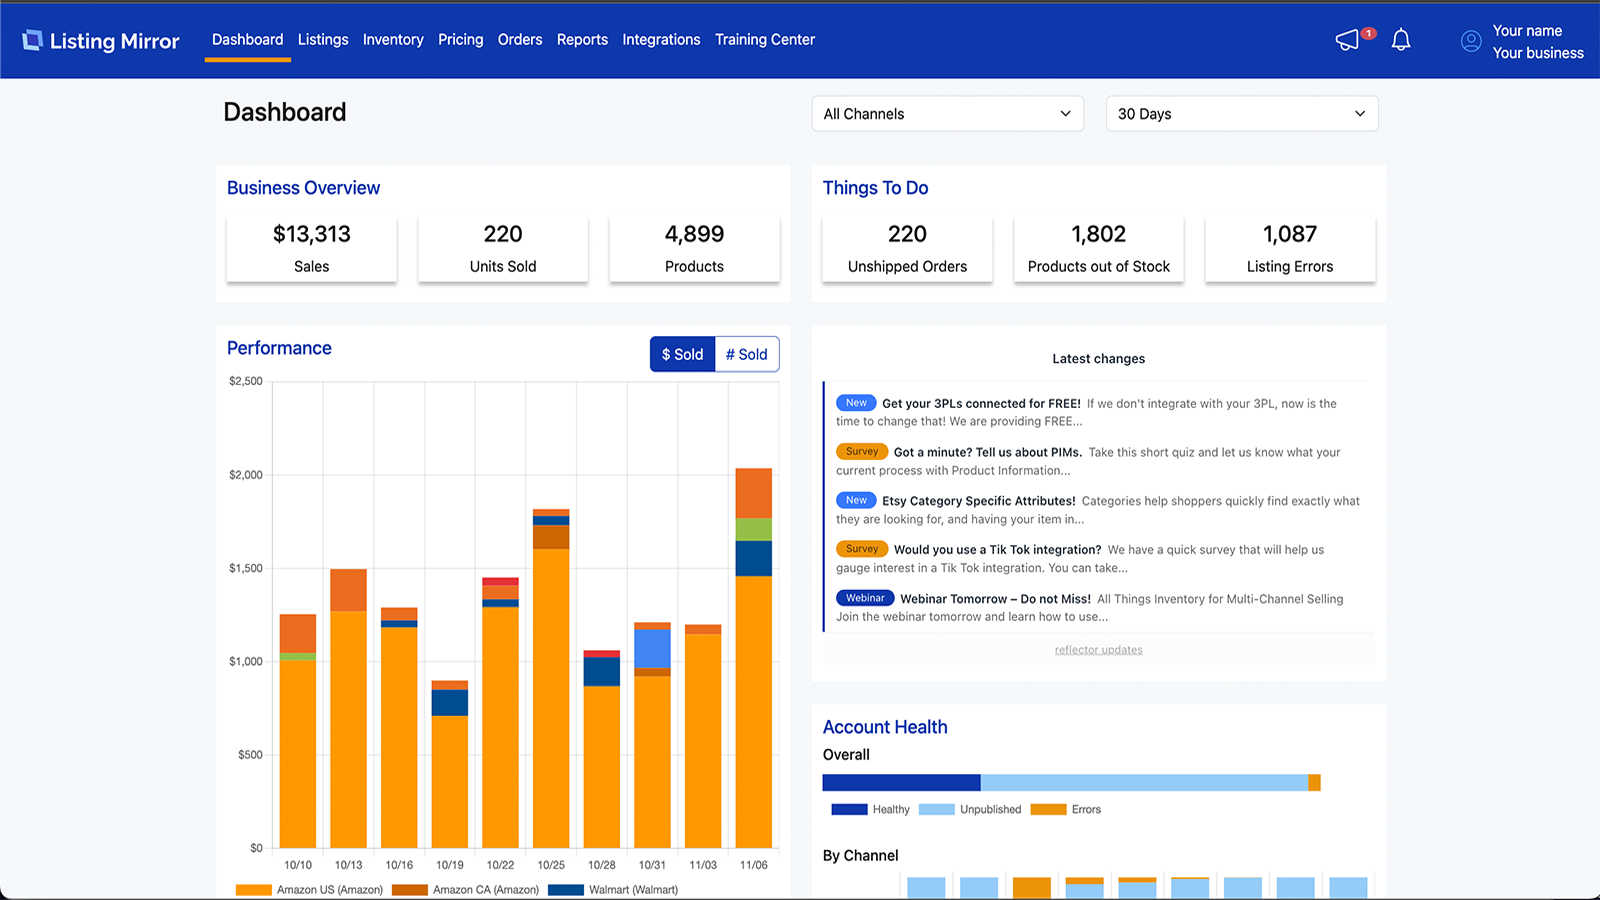 View a summary of your business on the Dashboard.